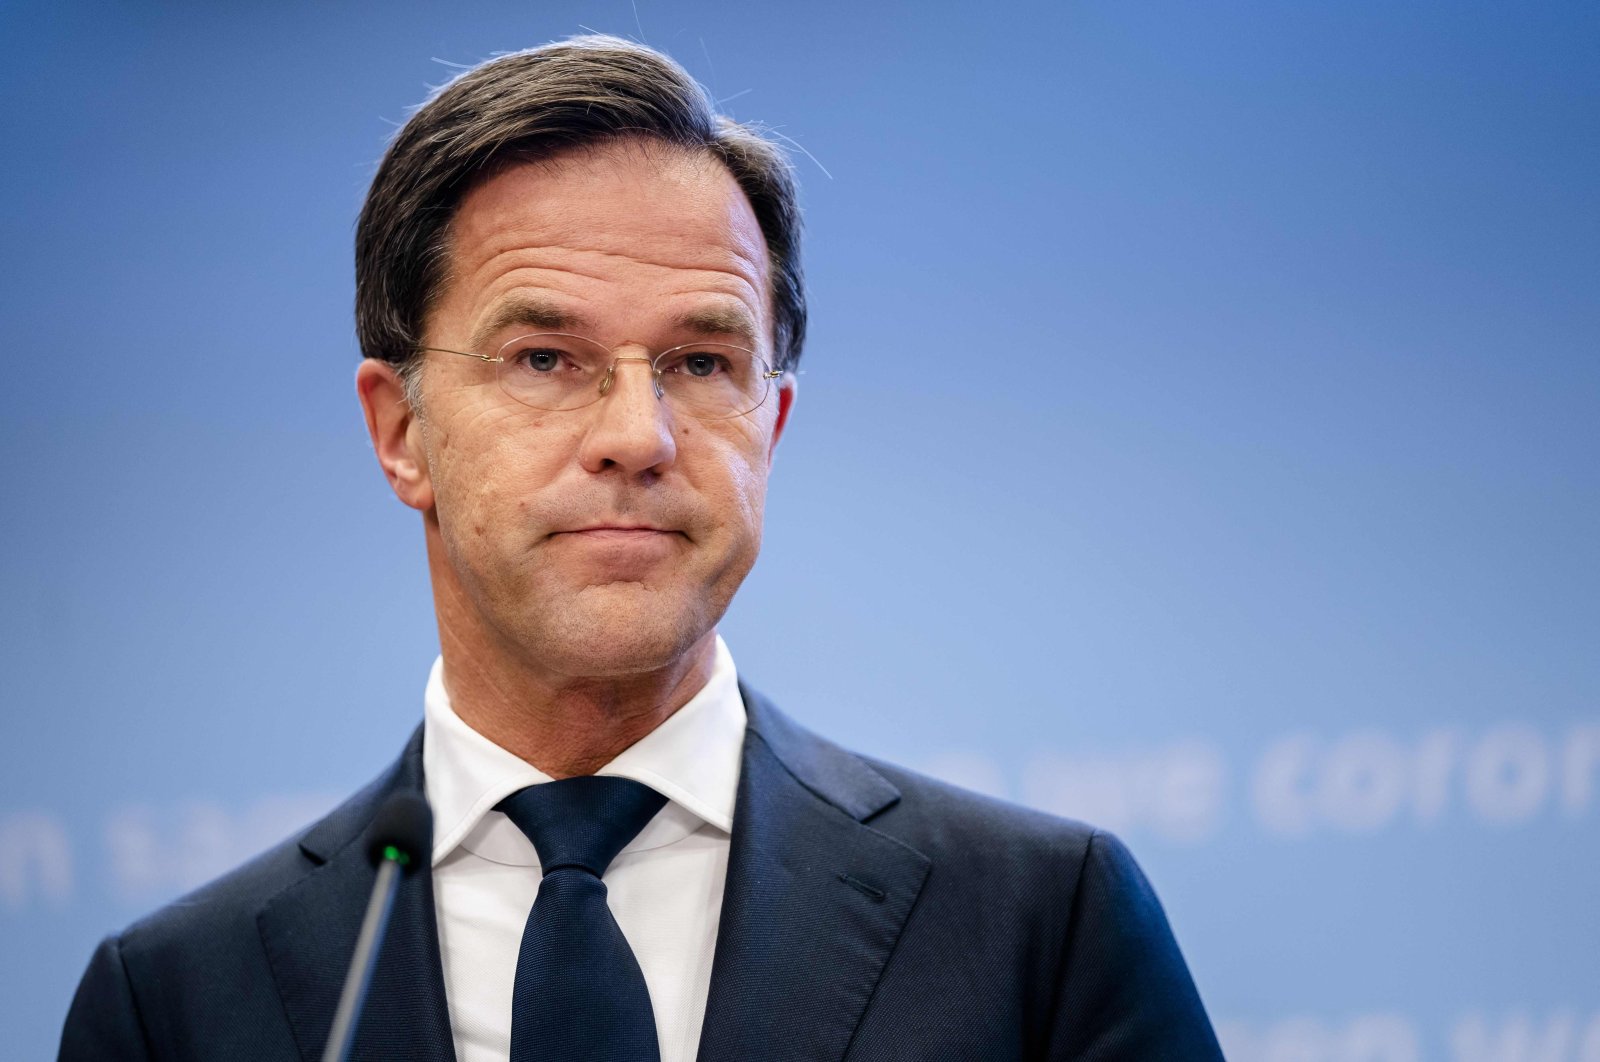 Dutch Prime Minister Mark Rutte gives a press conference on the COVID-19 situation in The Hague, Netherlands, Nov. 3, 2020. (AFP Photo)